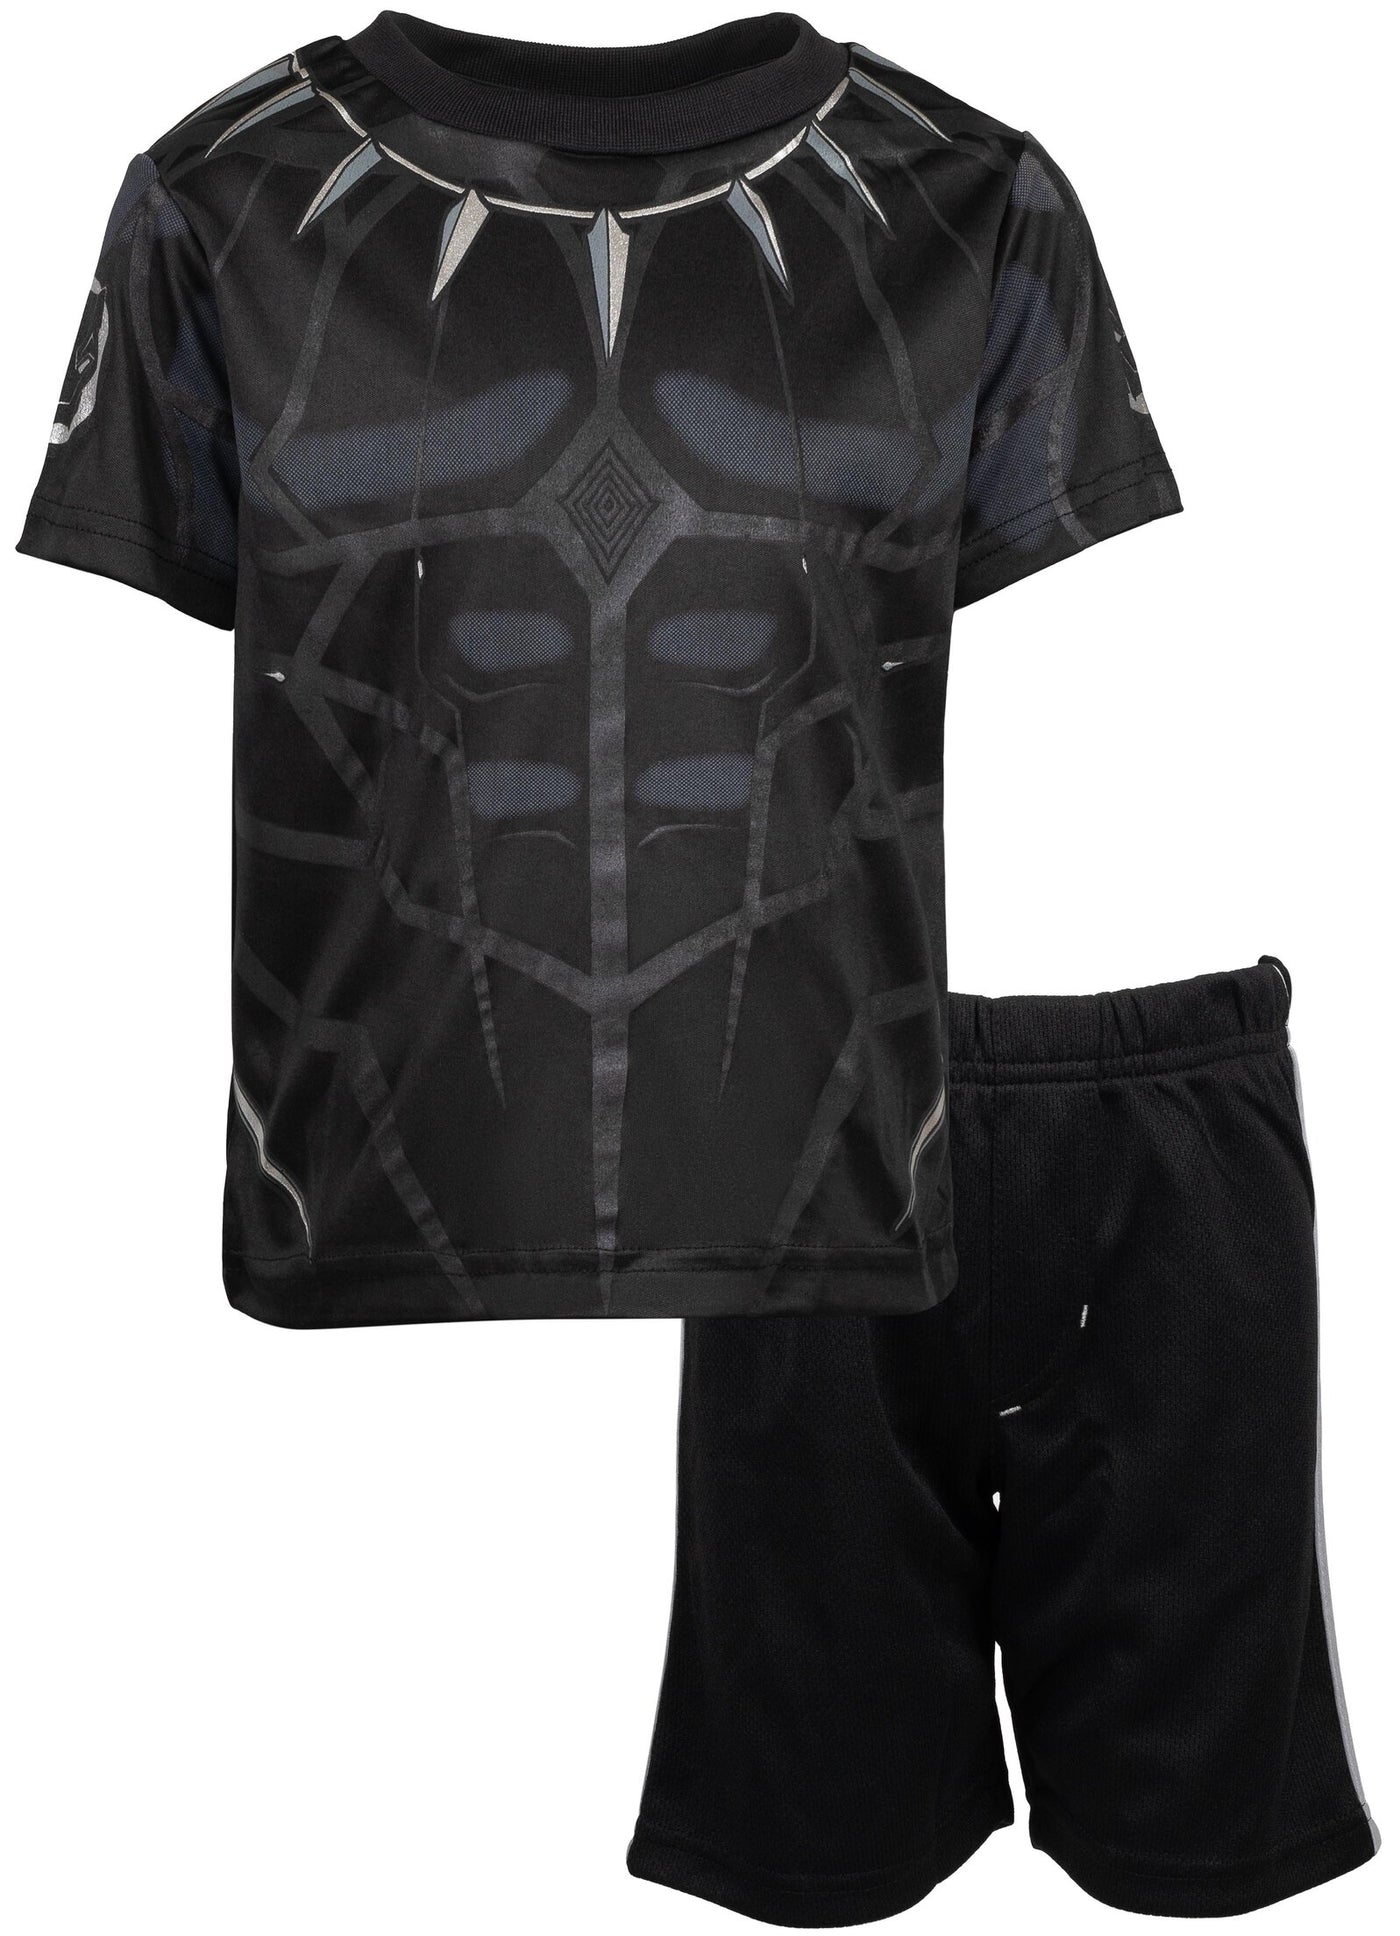 Marvel Avengers Black Panther Metallic Print Athletic T-Shirt and Shorts Outfit Set